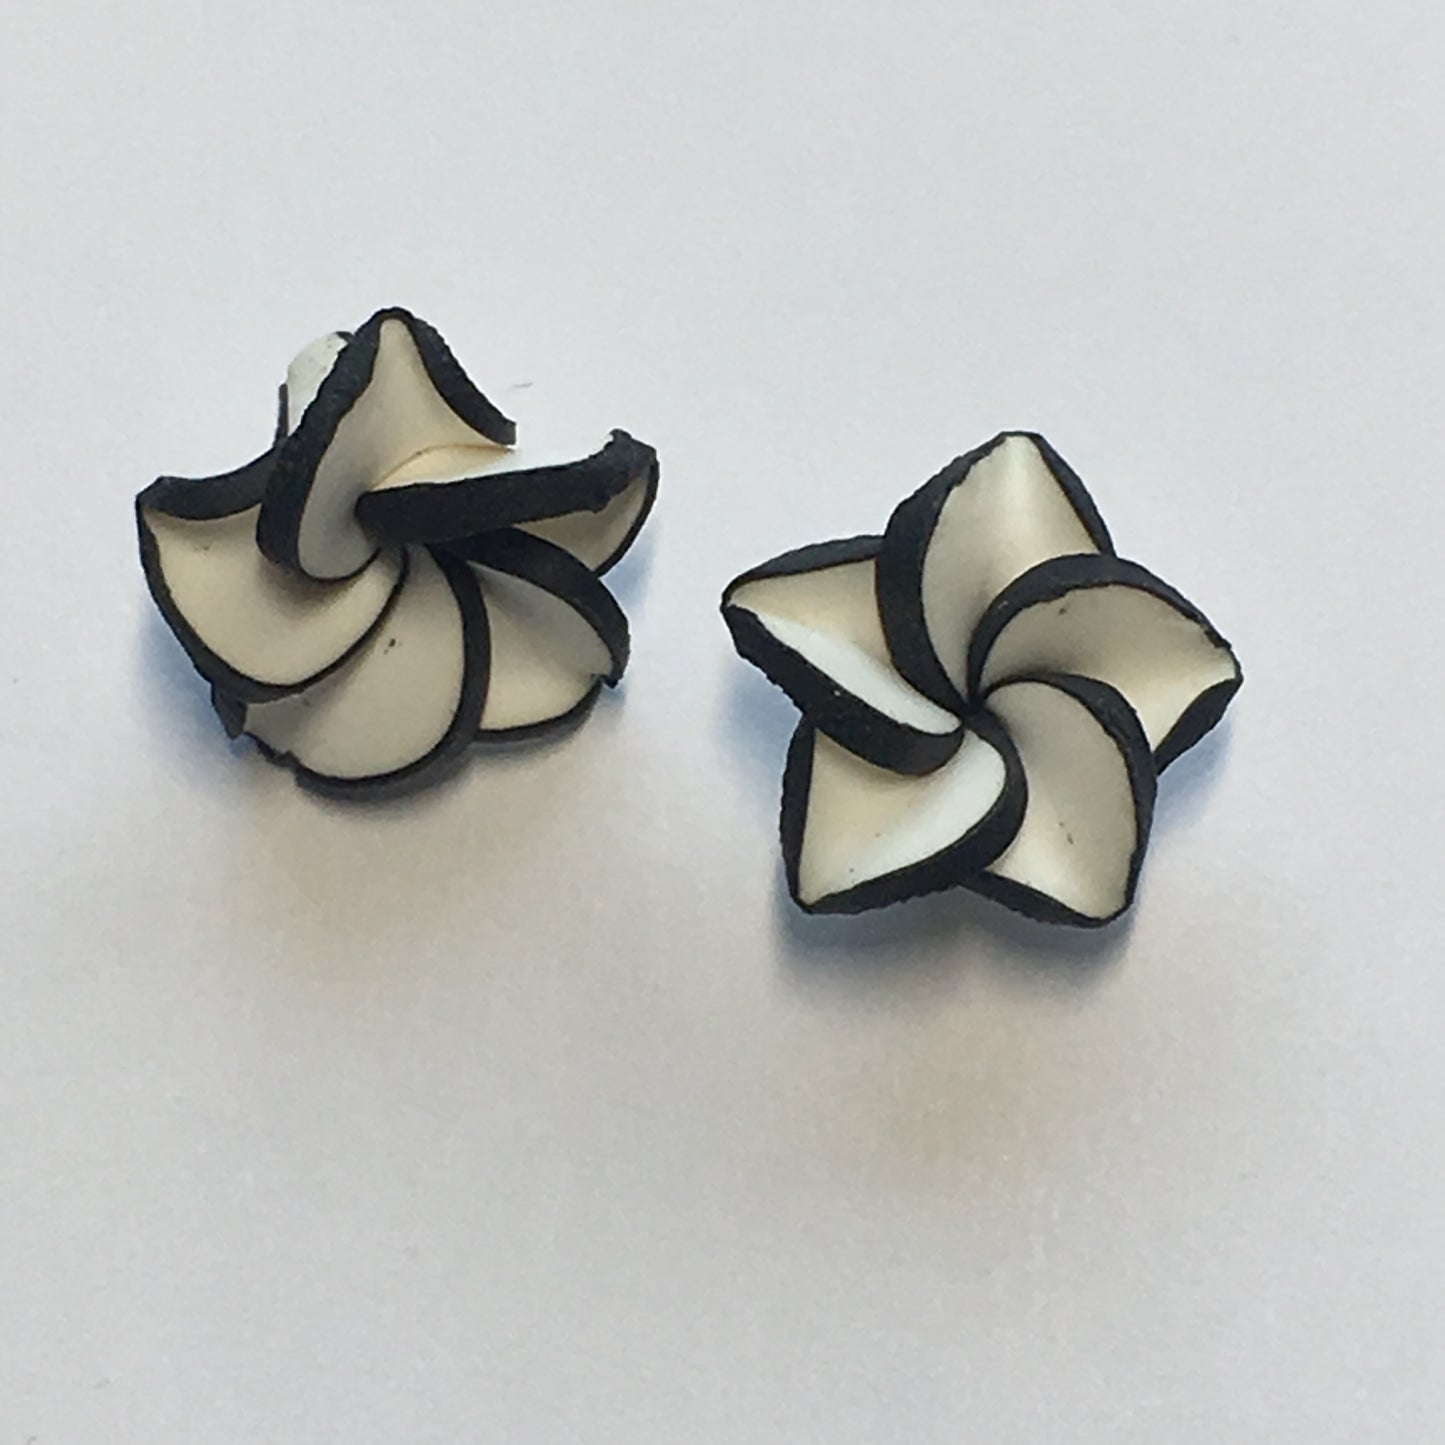 Black and White Polymer Clay Flower Beads, 8 x 10 mm - 2 Beads